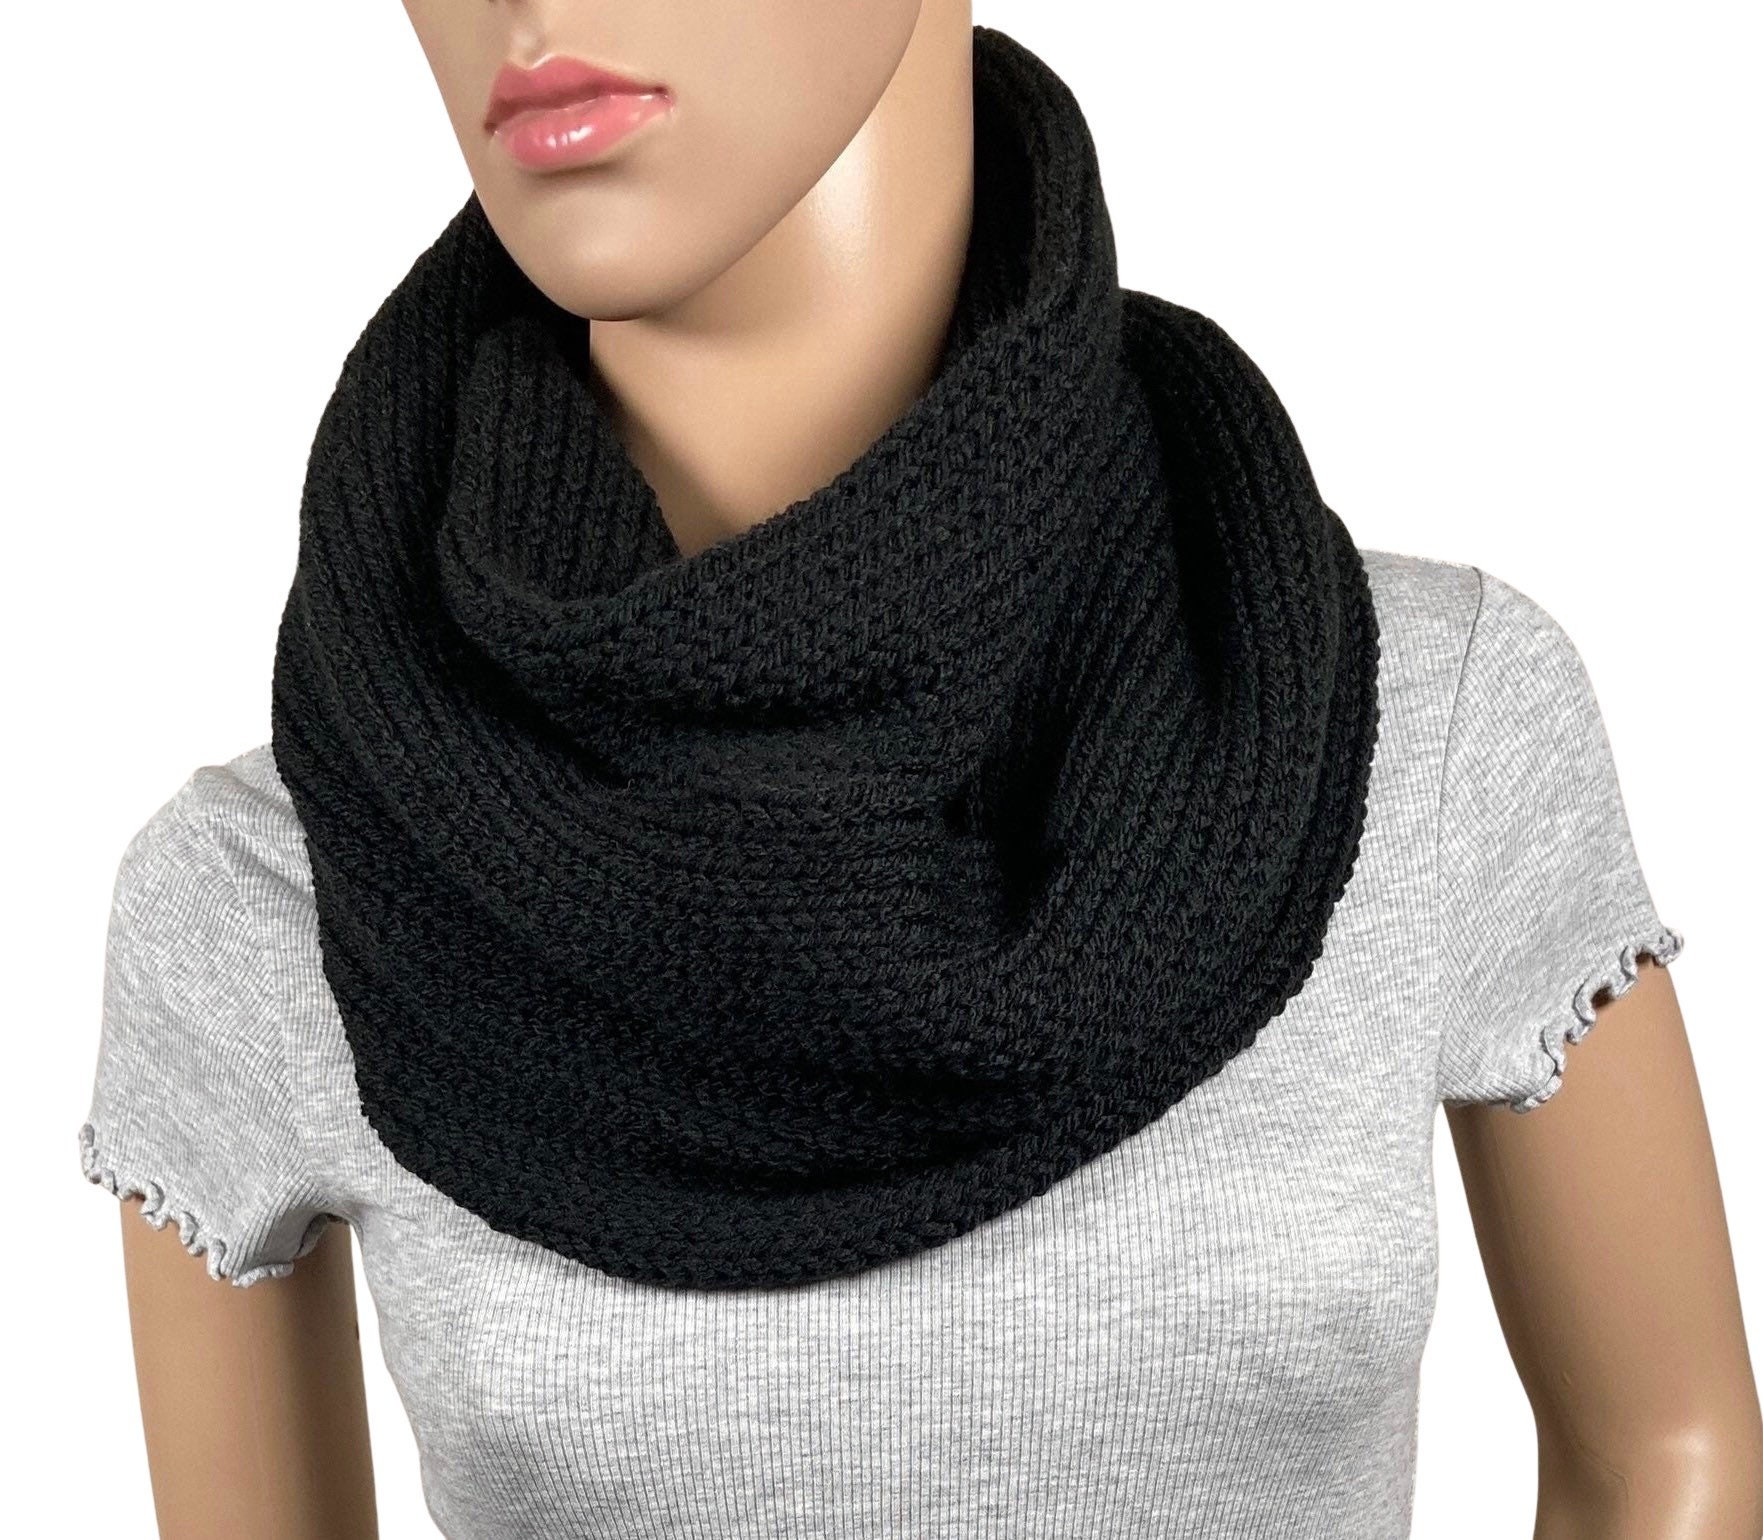 Women's Black Infinity Scarf Men's Knitted Scarf - Etsy